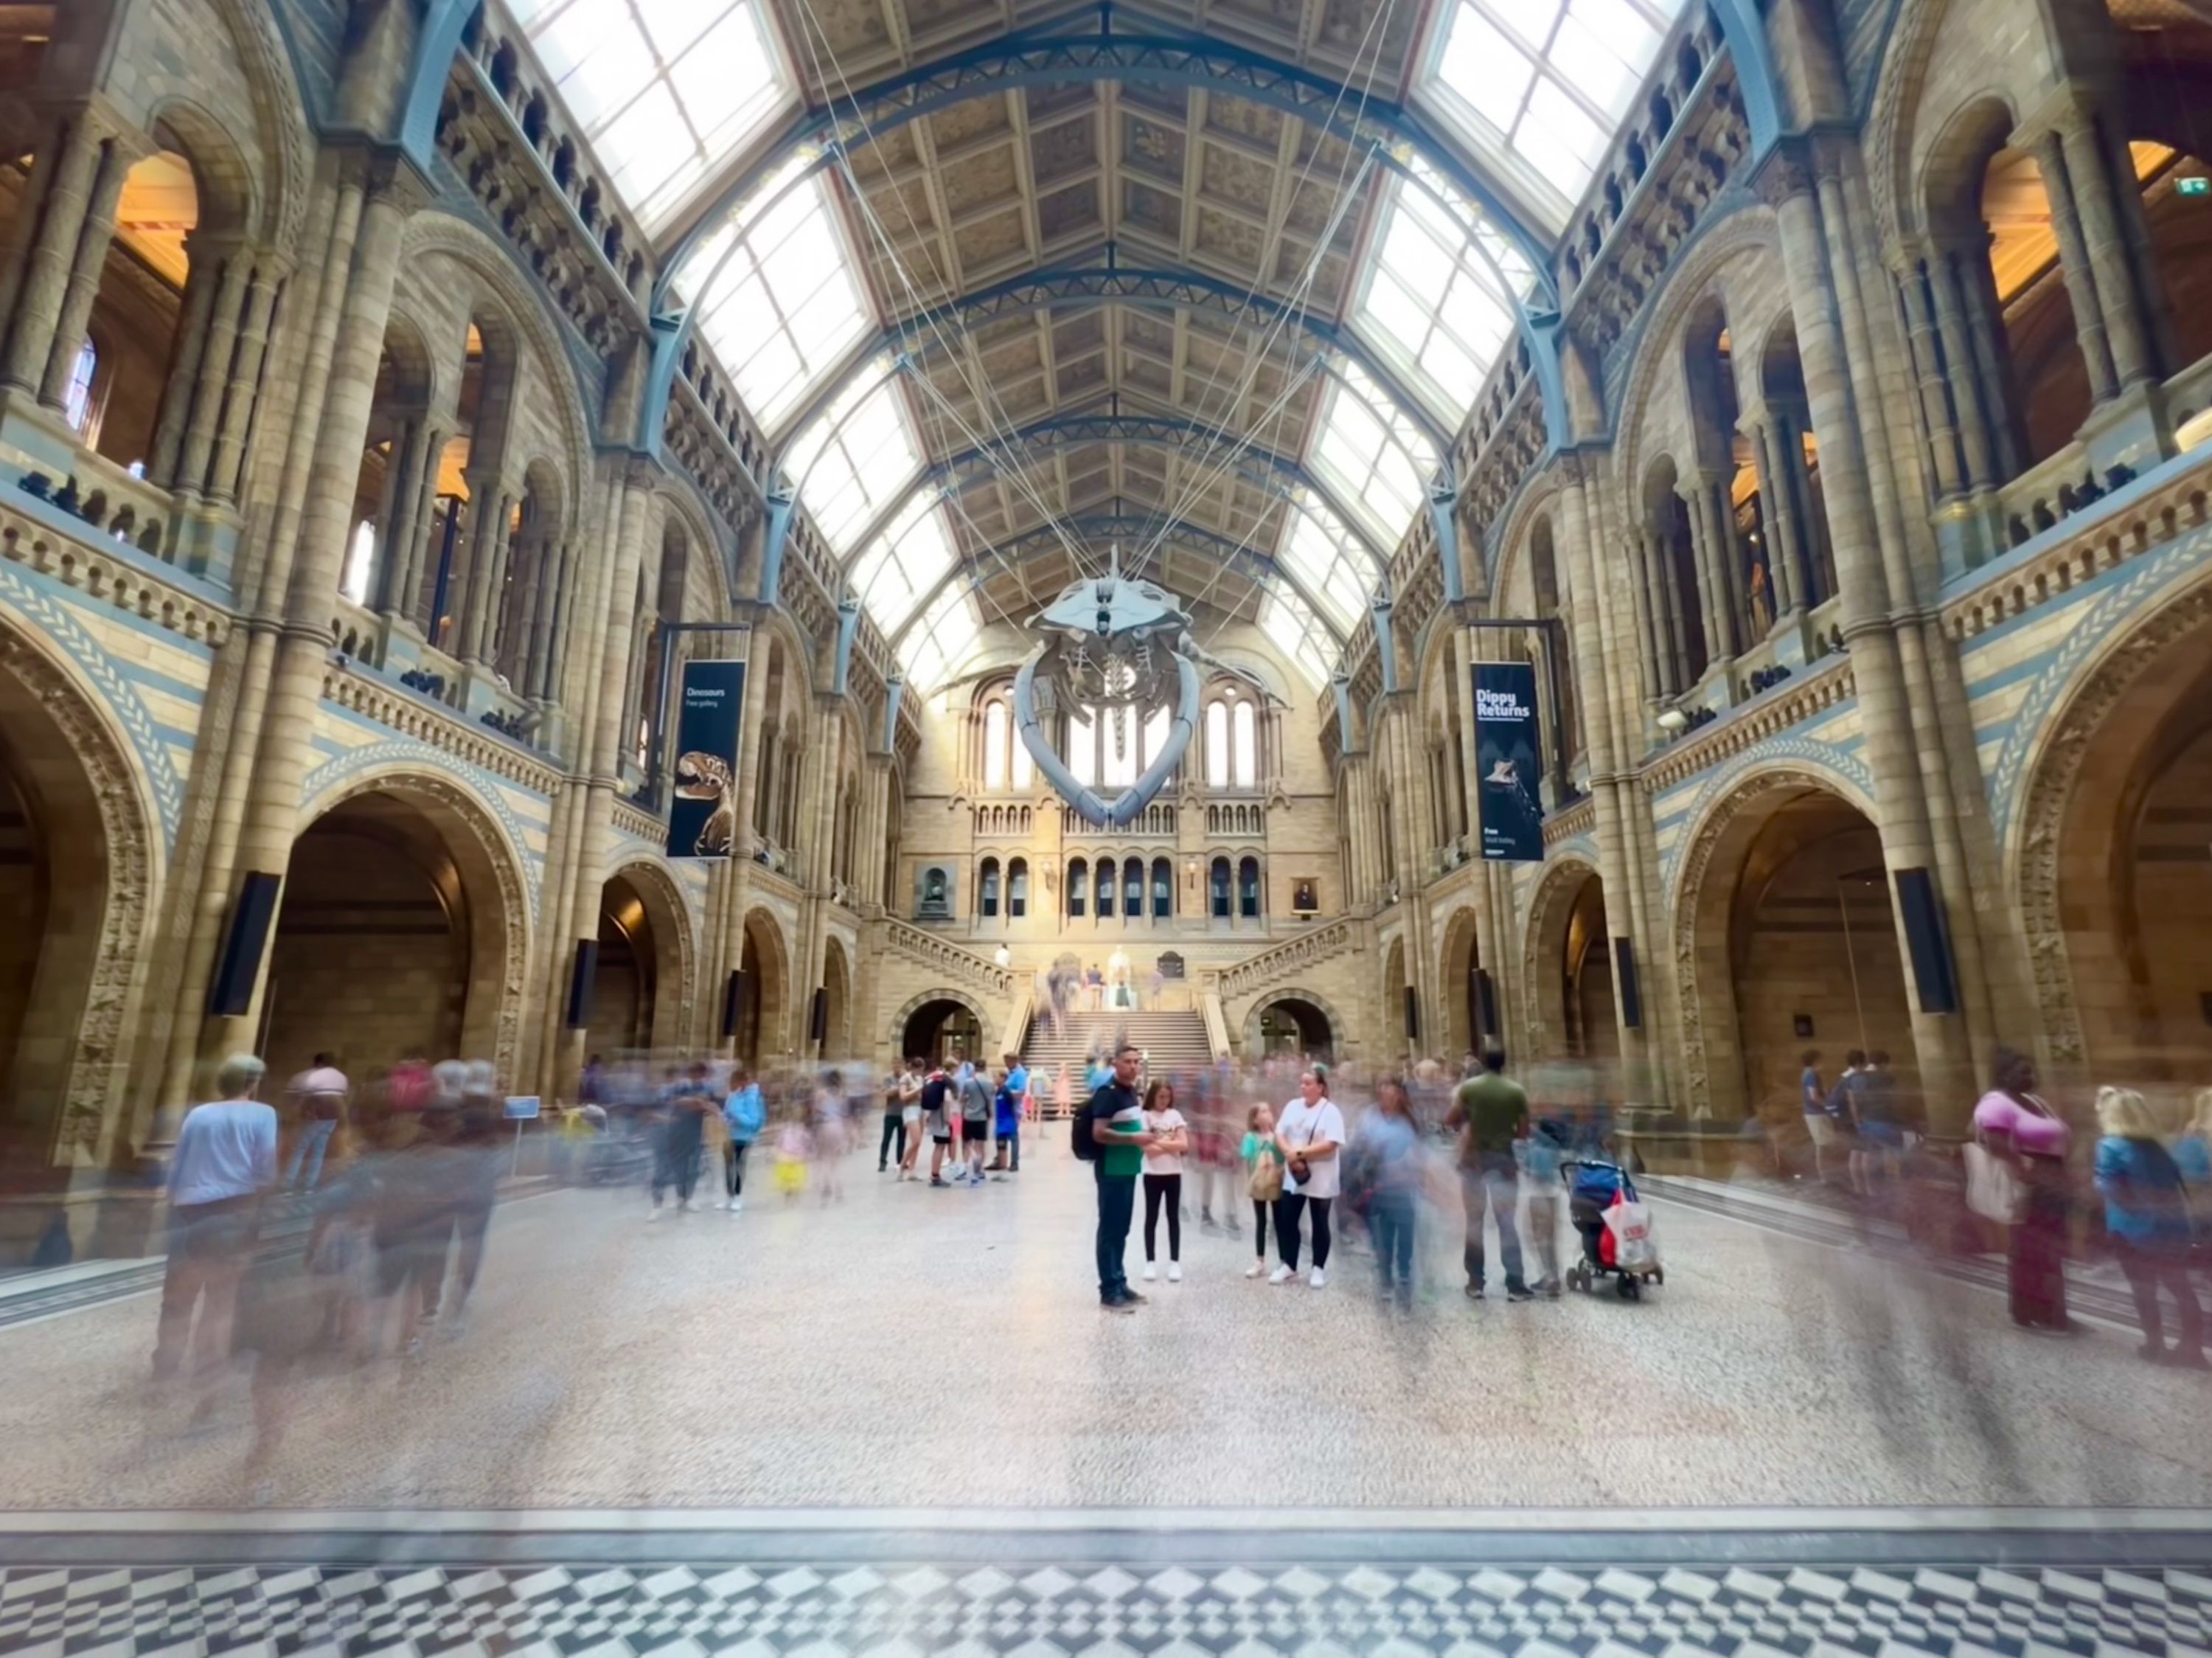 Love the Hintze Hall at the Natural History Museum… Reminds me of the anticipation from visits as a child.